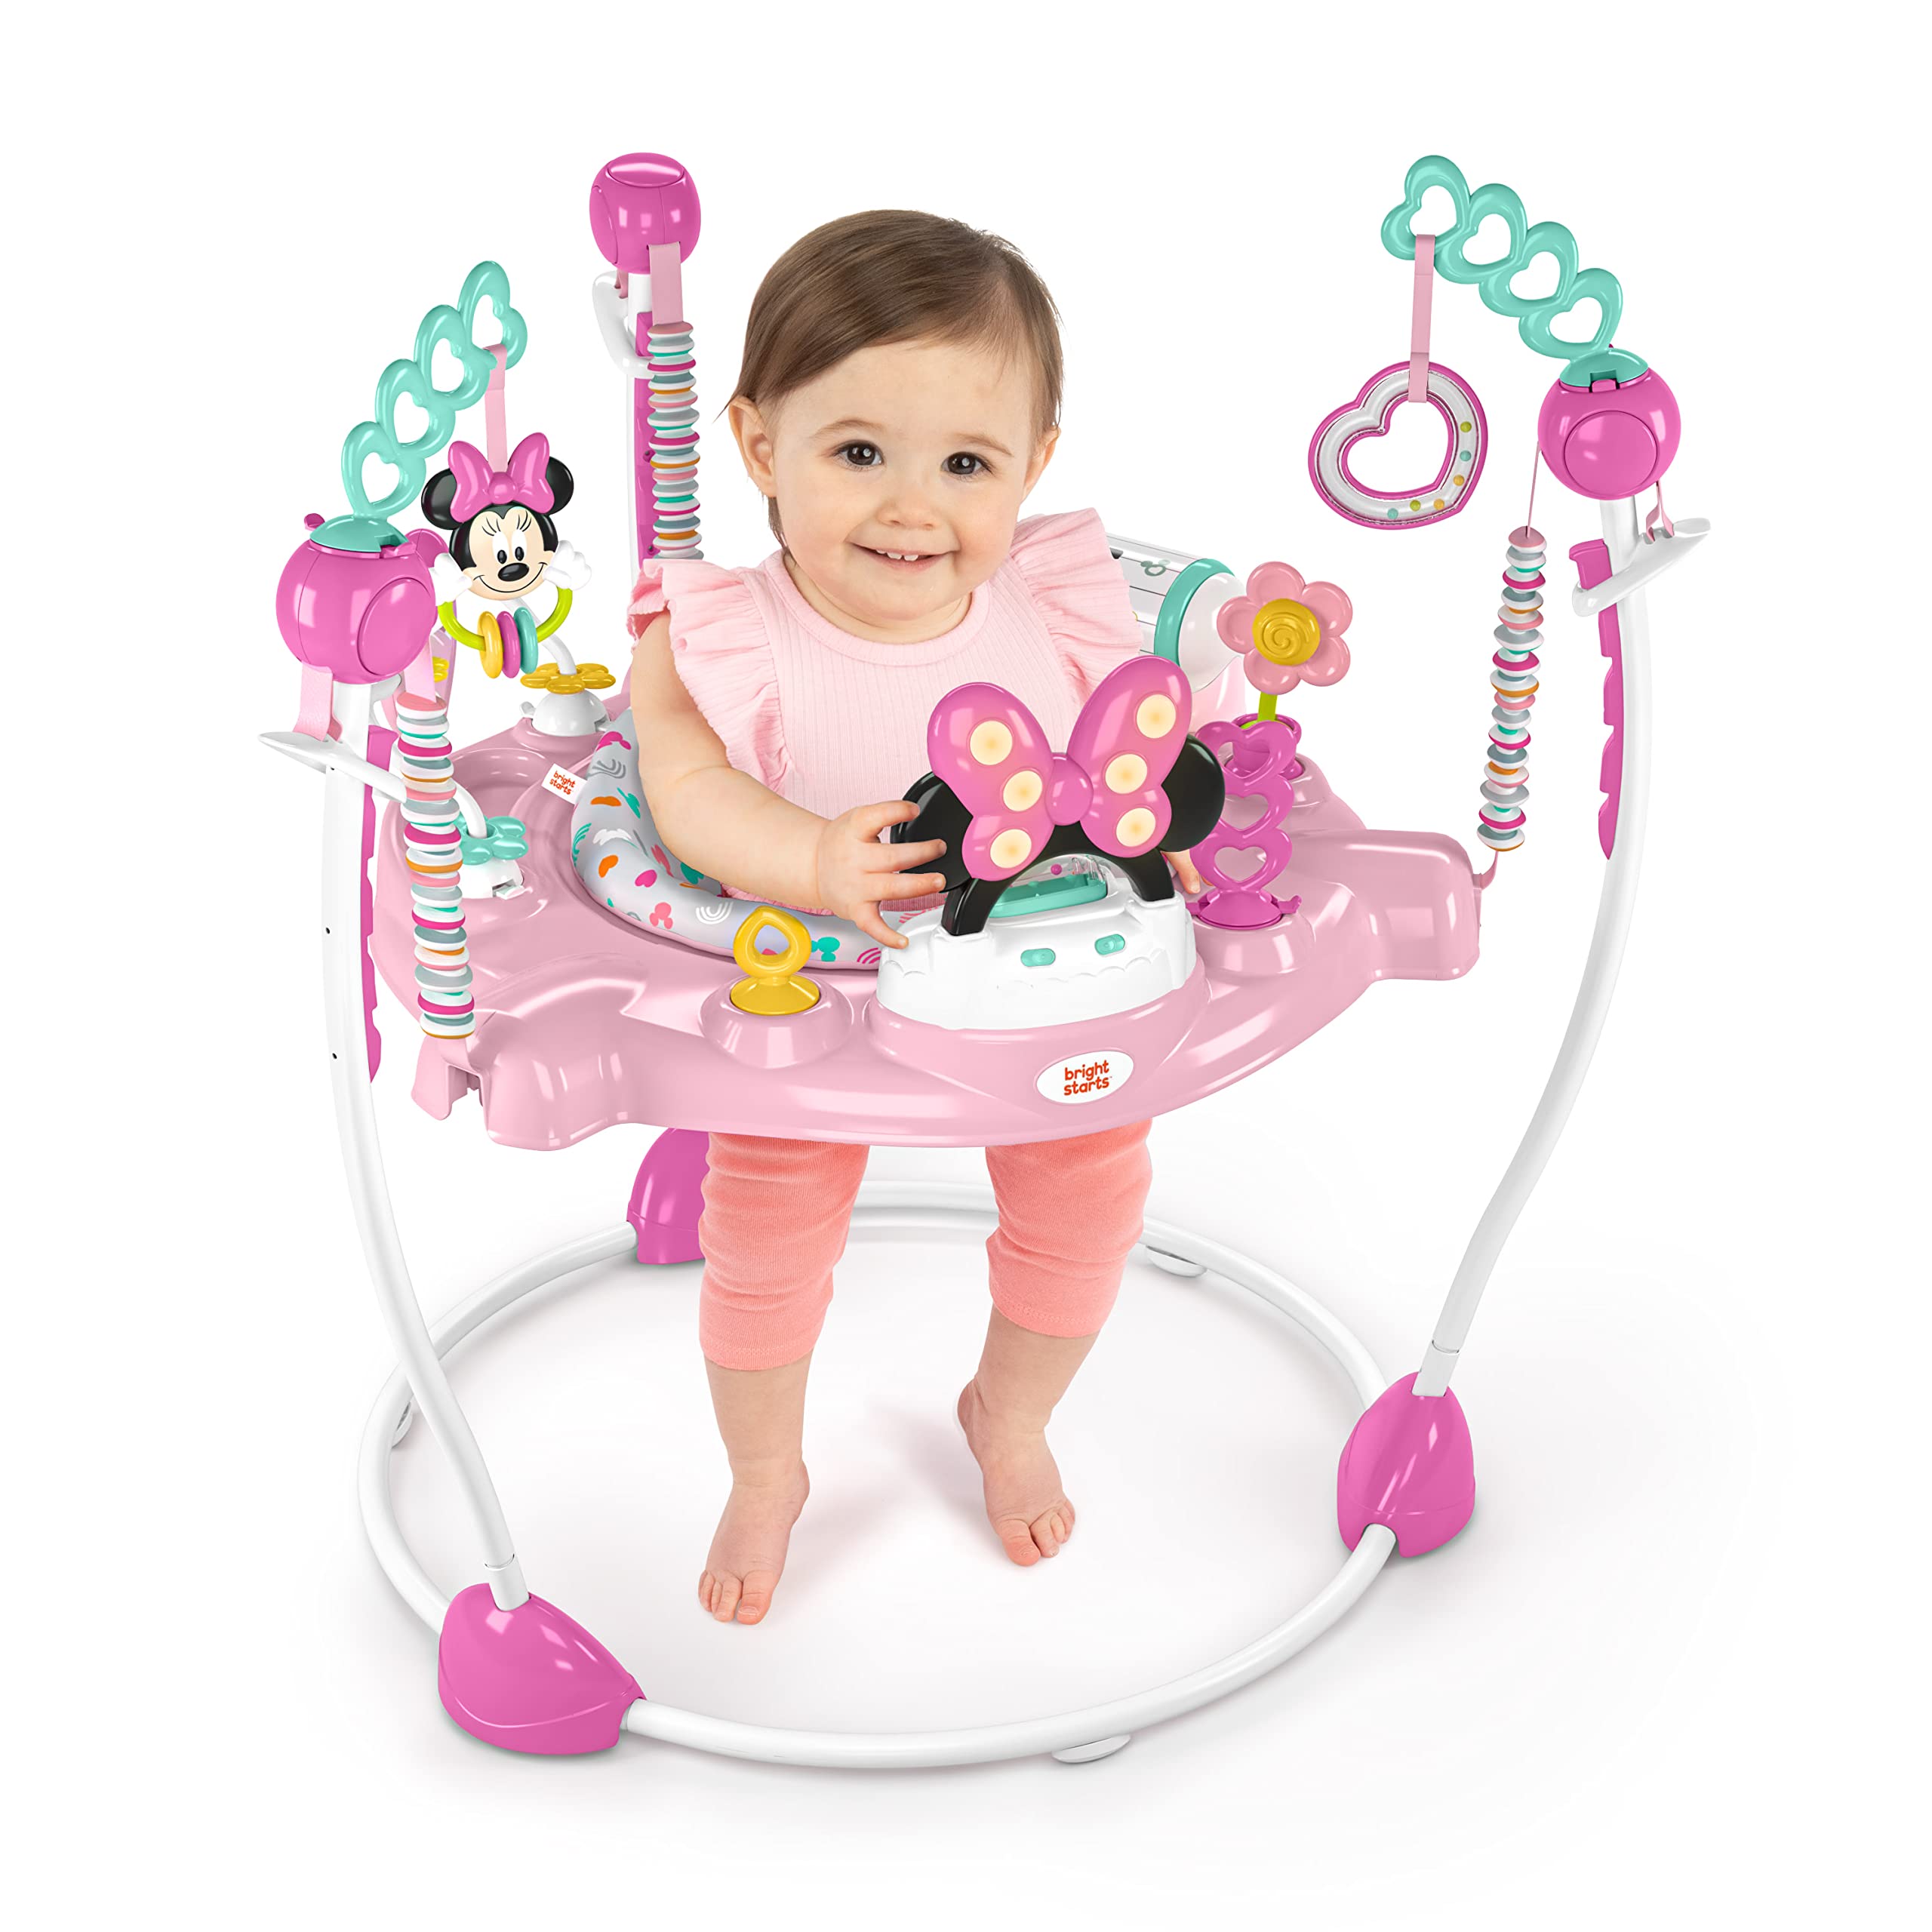 Disney Baby Minnie Mouse Forever Besties Baby Activity Center Jumper with 10 Toys, Lights & Sounds, 360-Degree Seat, 6-12 Months (Pink)